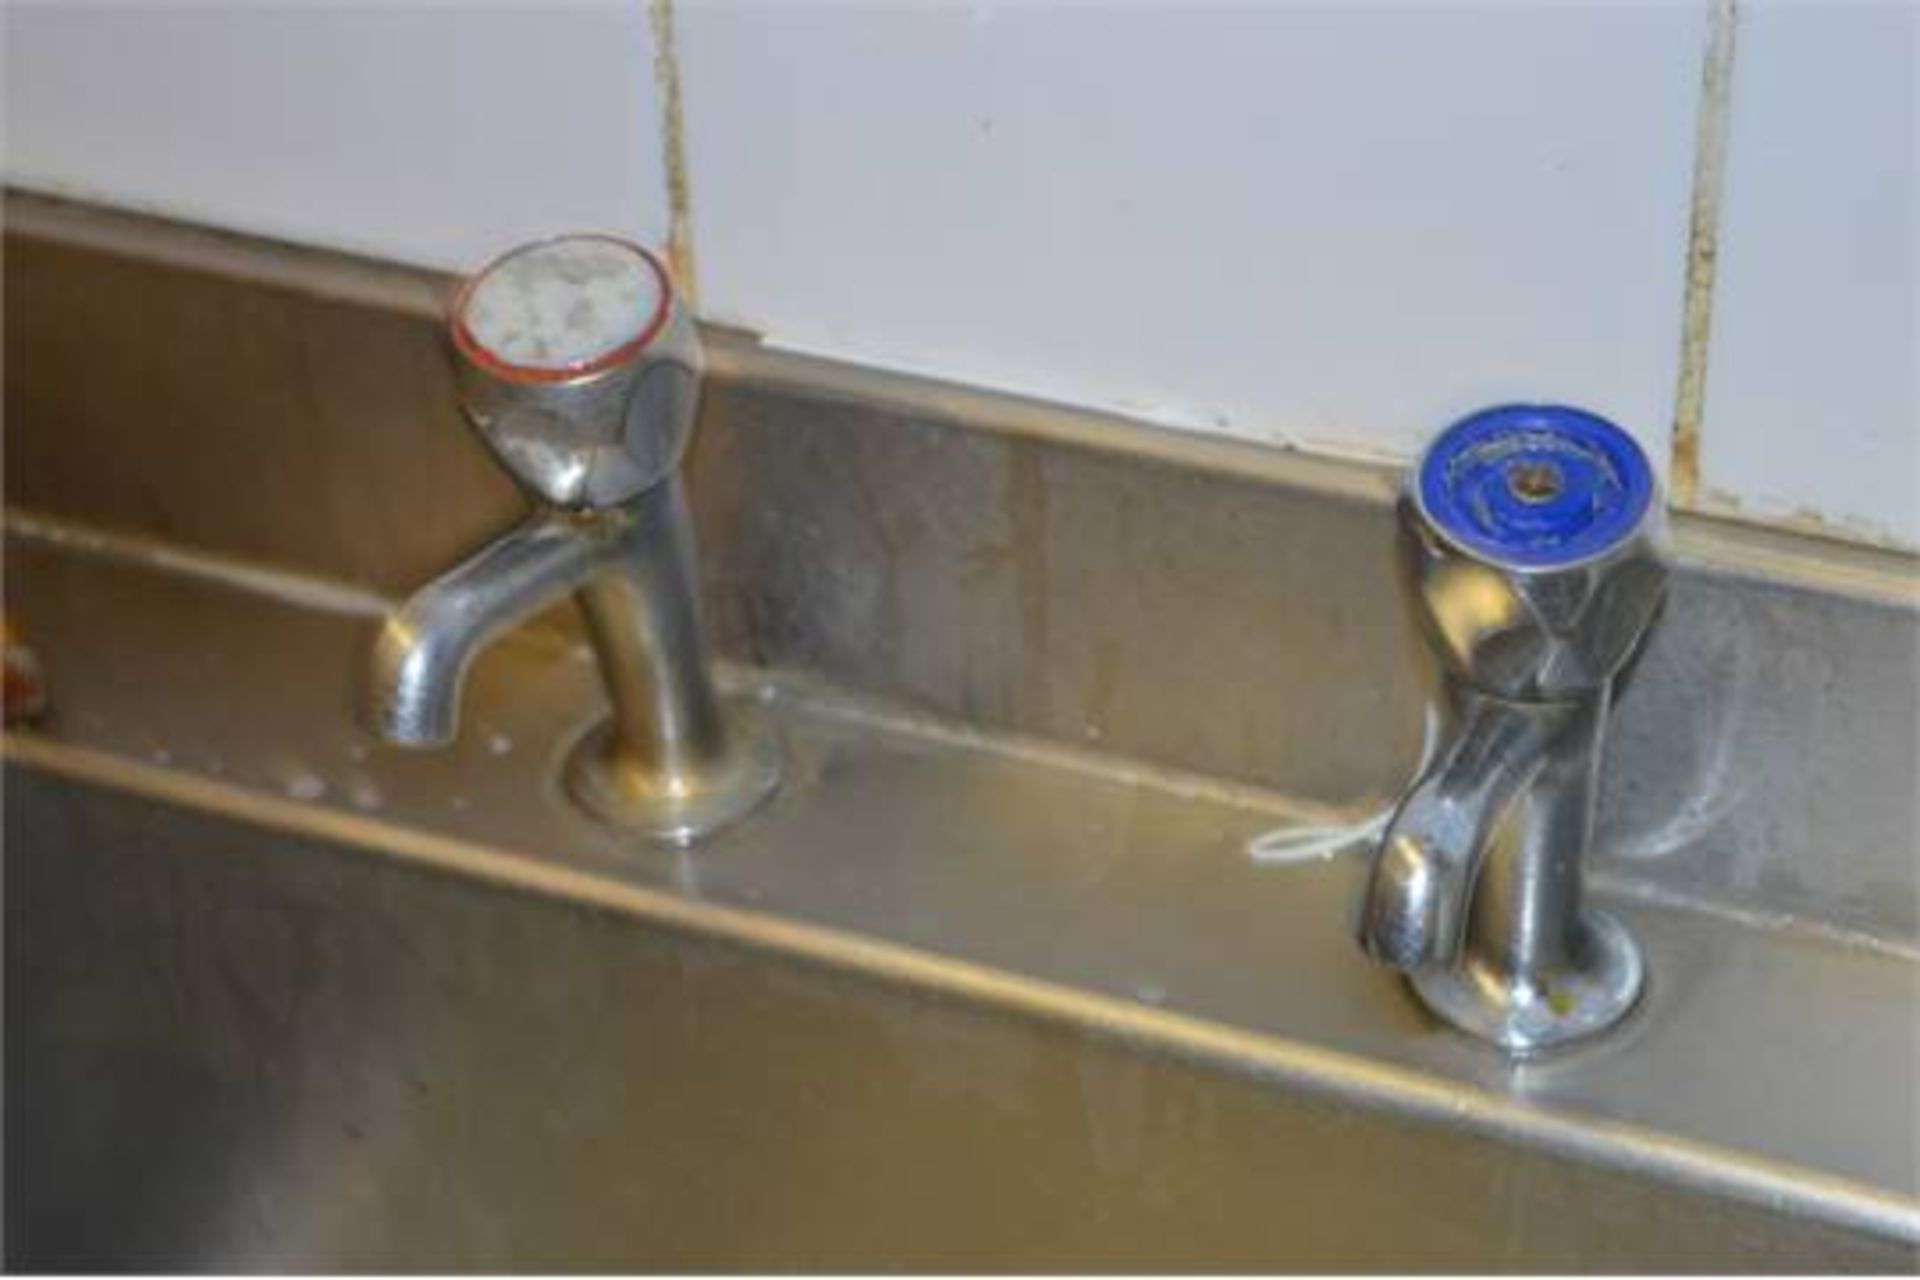 1 x Stainless Steel Double Bowl Sink Counter With Plug Straines - H87 x W251 x D60 cms - Ref GD212 - - Image 4 of 4